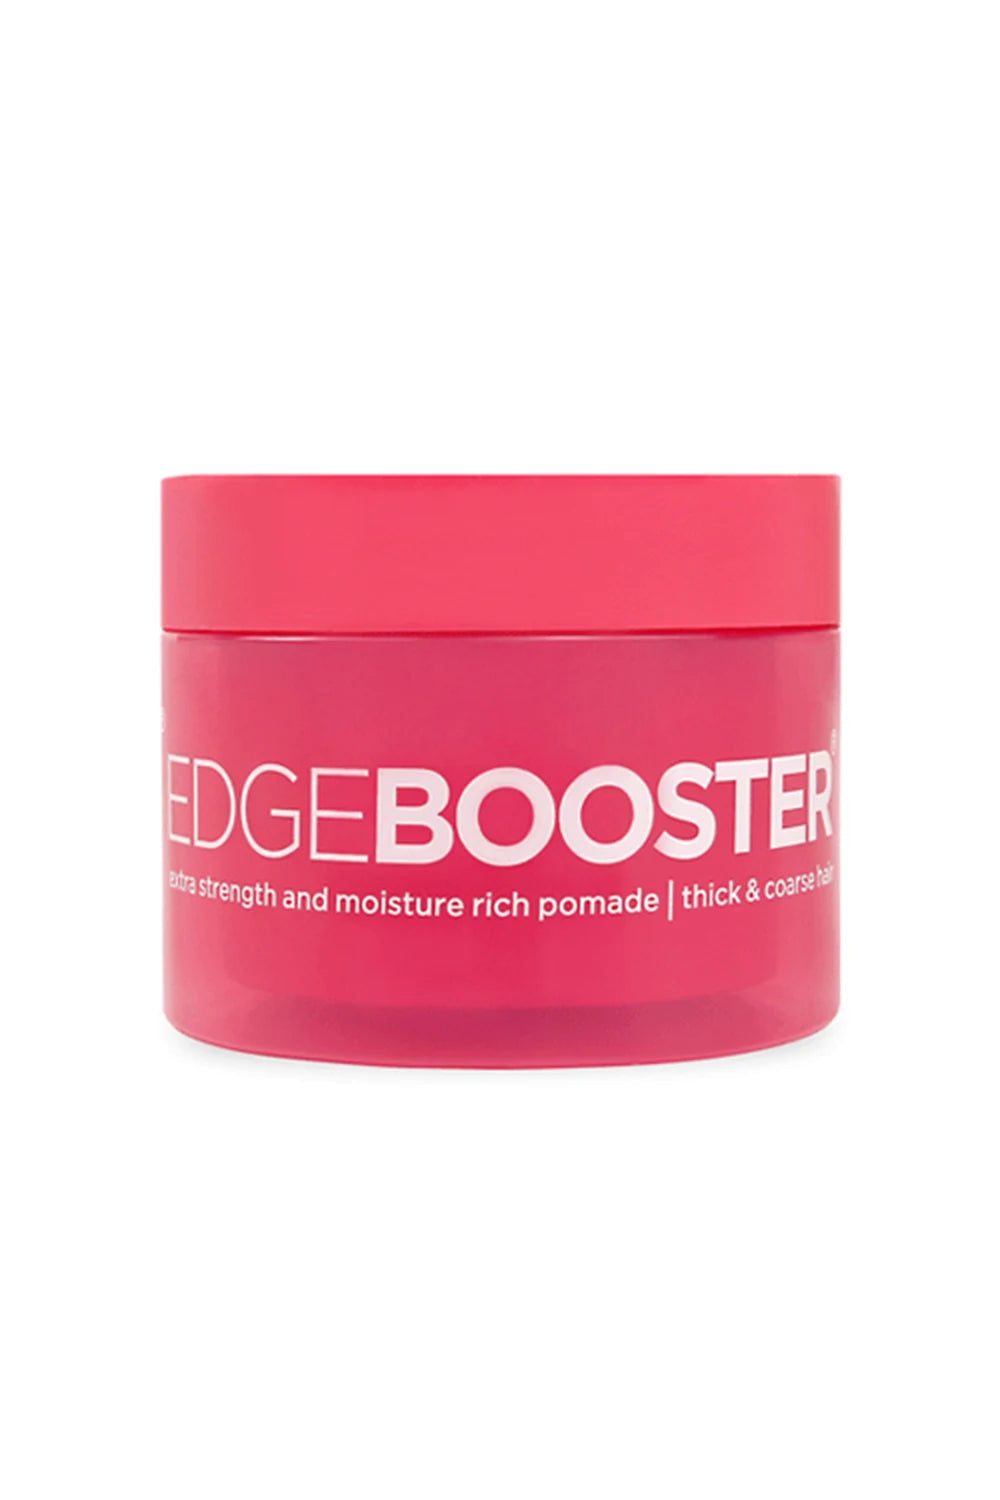 EDGE BOOSTER Extra Strength and Moisture Rich Pomade 3.38 Oz